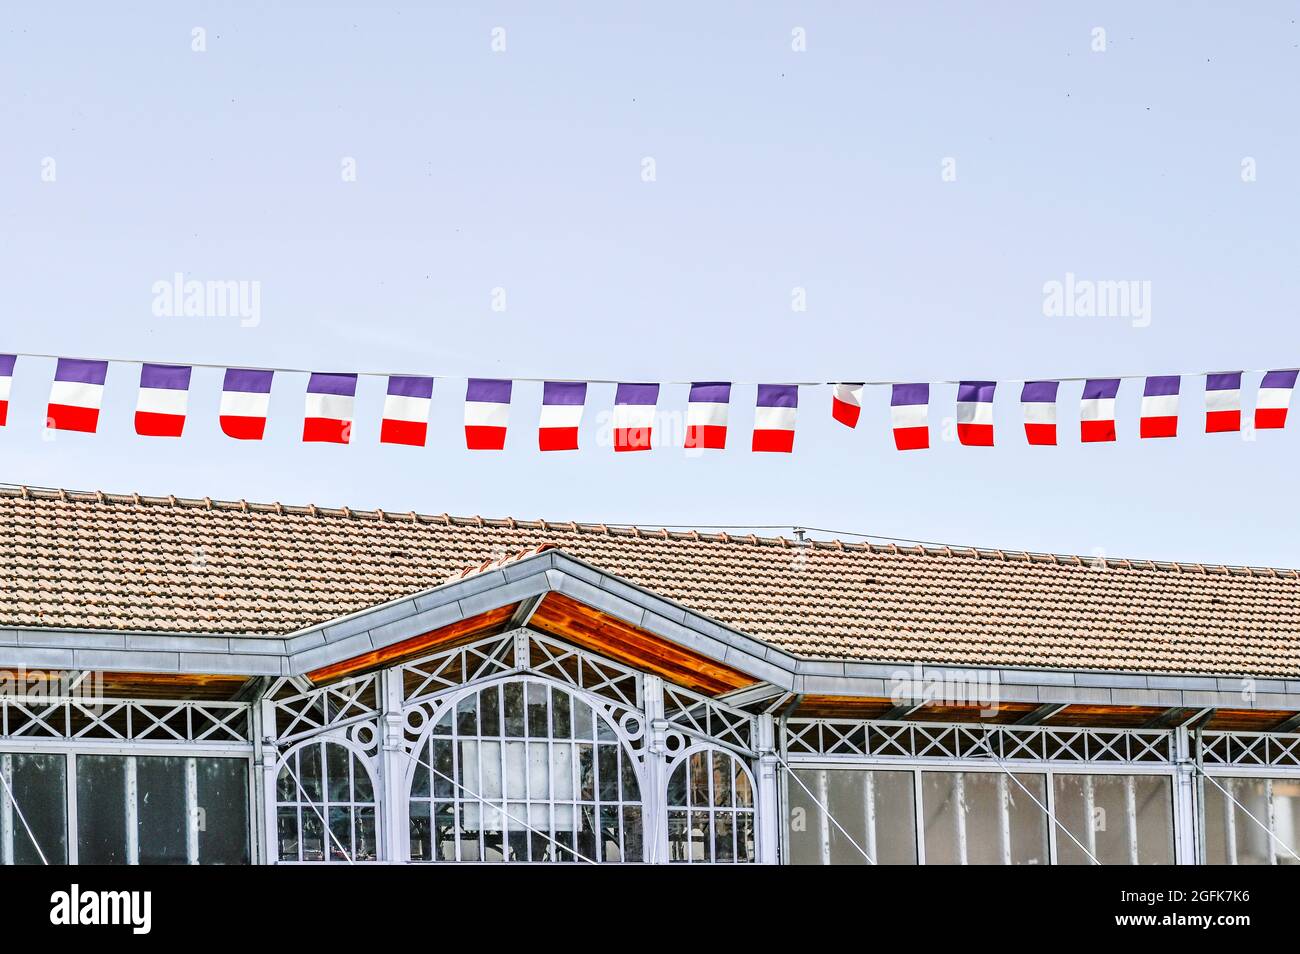 French flags waving in the wind above the roof of the Saint-Cyprien market hall on the occasion of July 14, France’s national holiday. Stock Photo